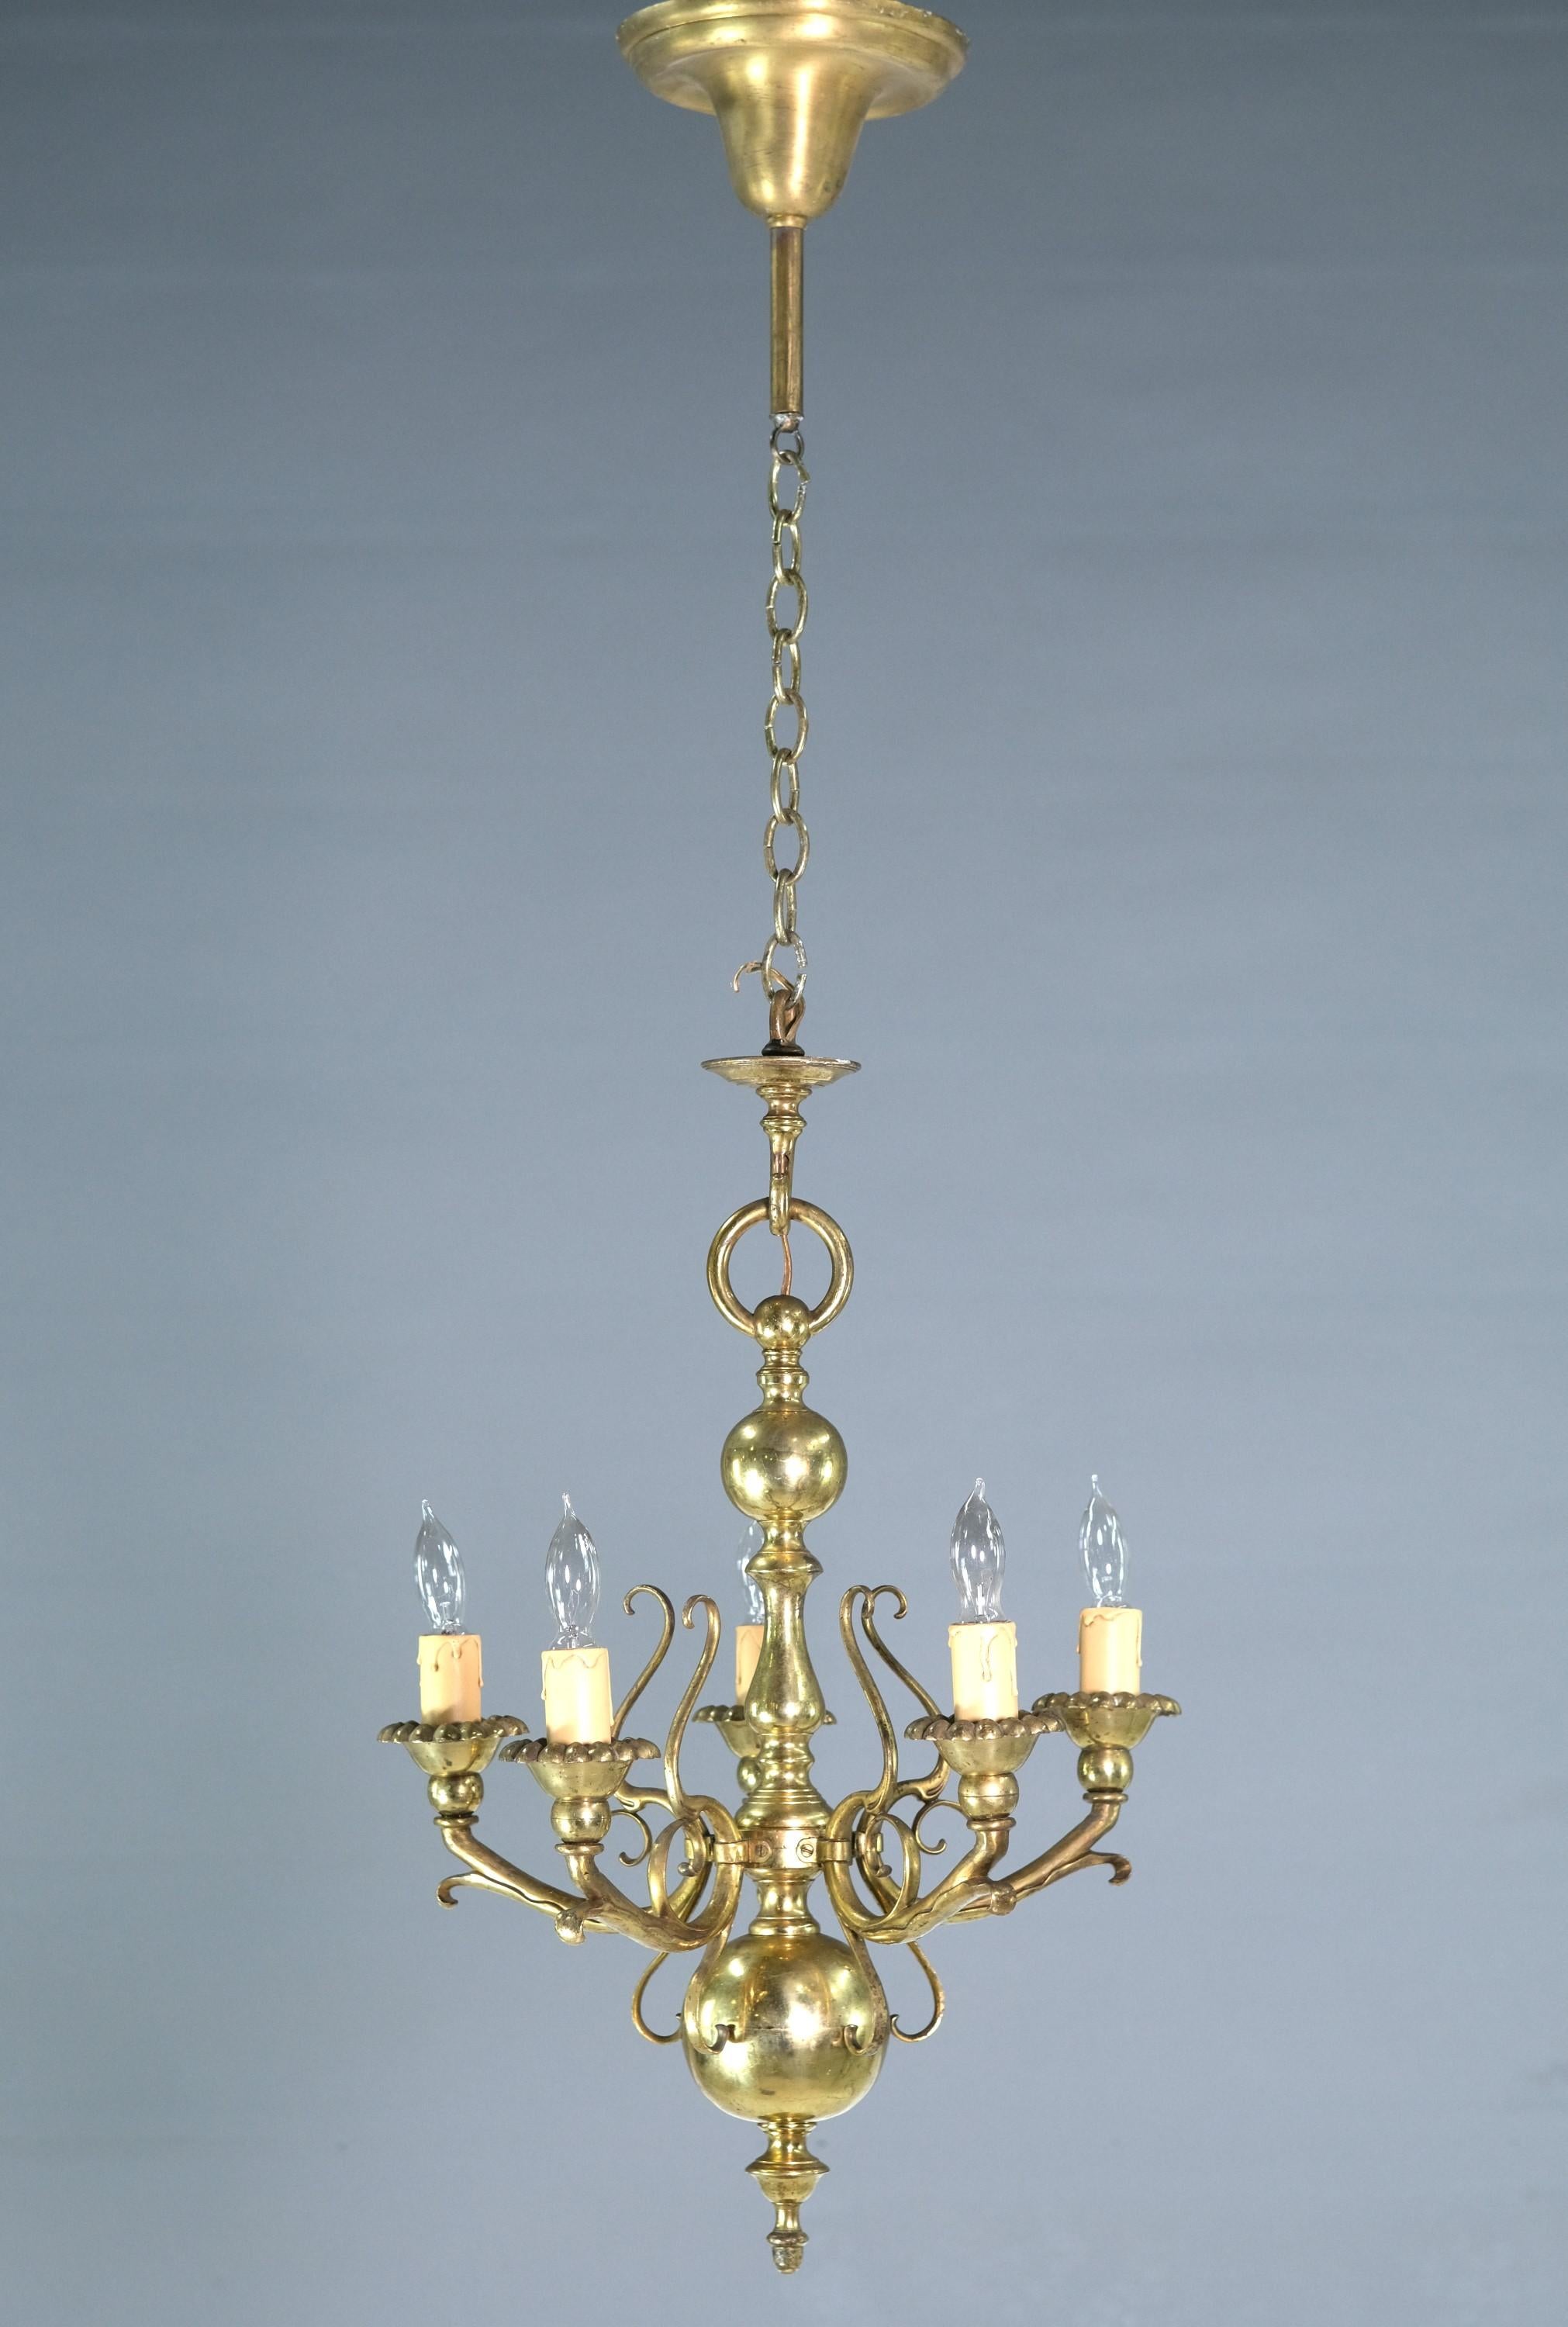 Early 20th century solid brass chandelier with five lights done in a Baroque style. Takes five standard household medium base lightbulbs. Cleaned and restored. Please note, this item is located in our Scranton, PA location.